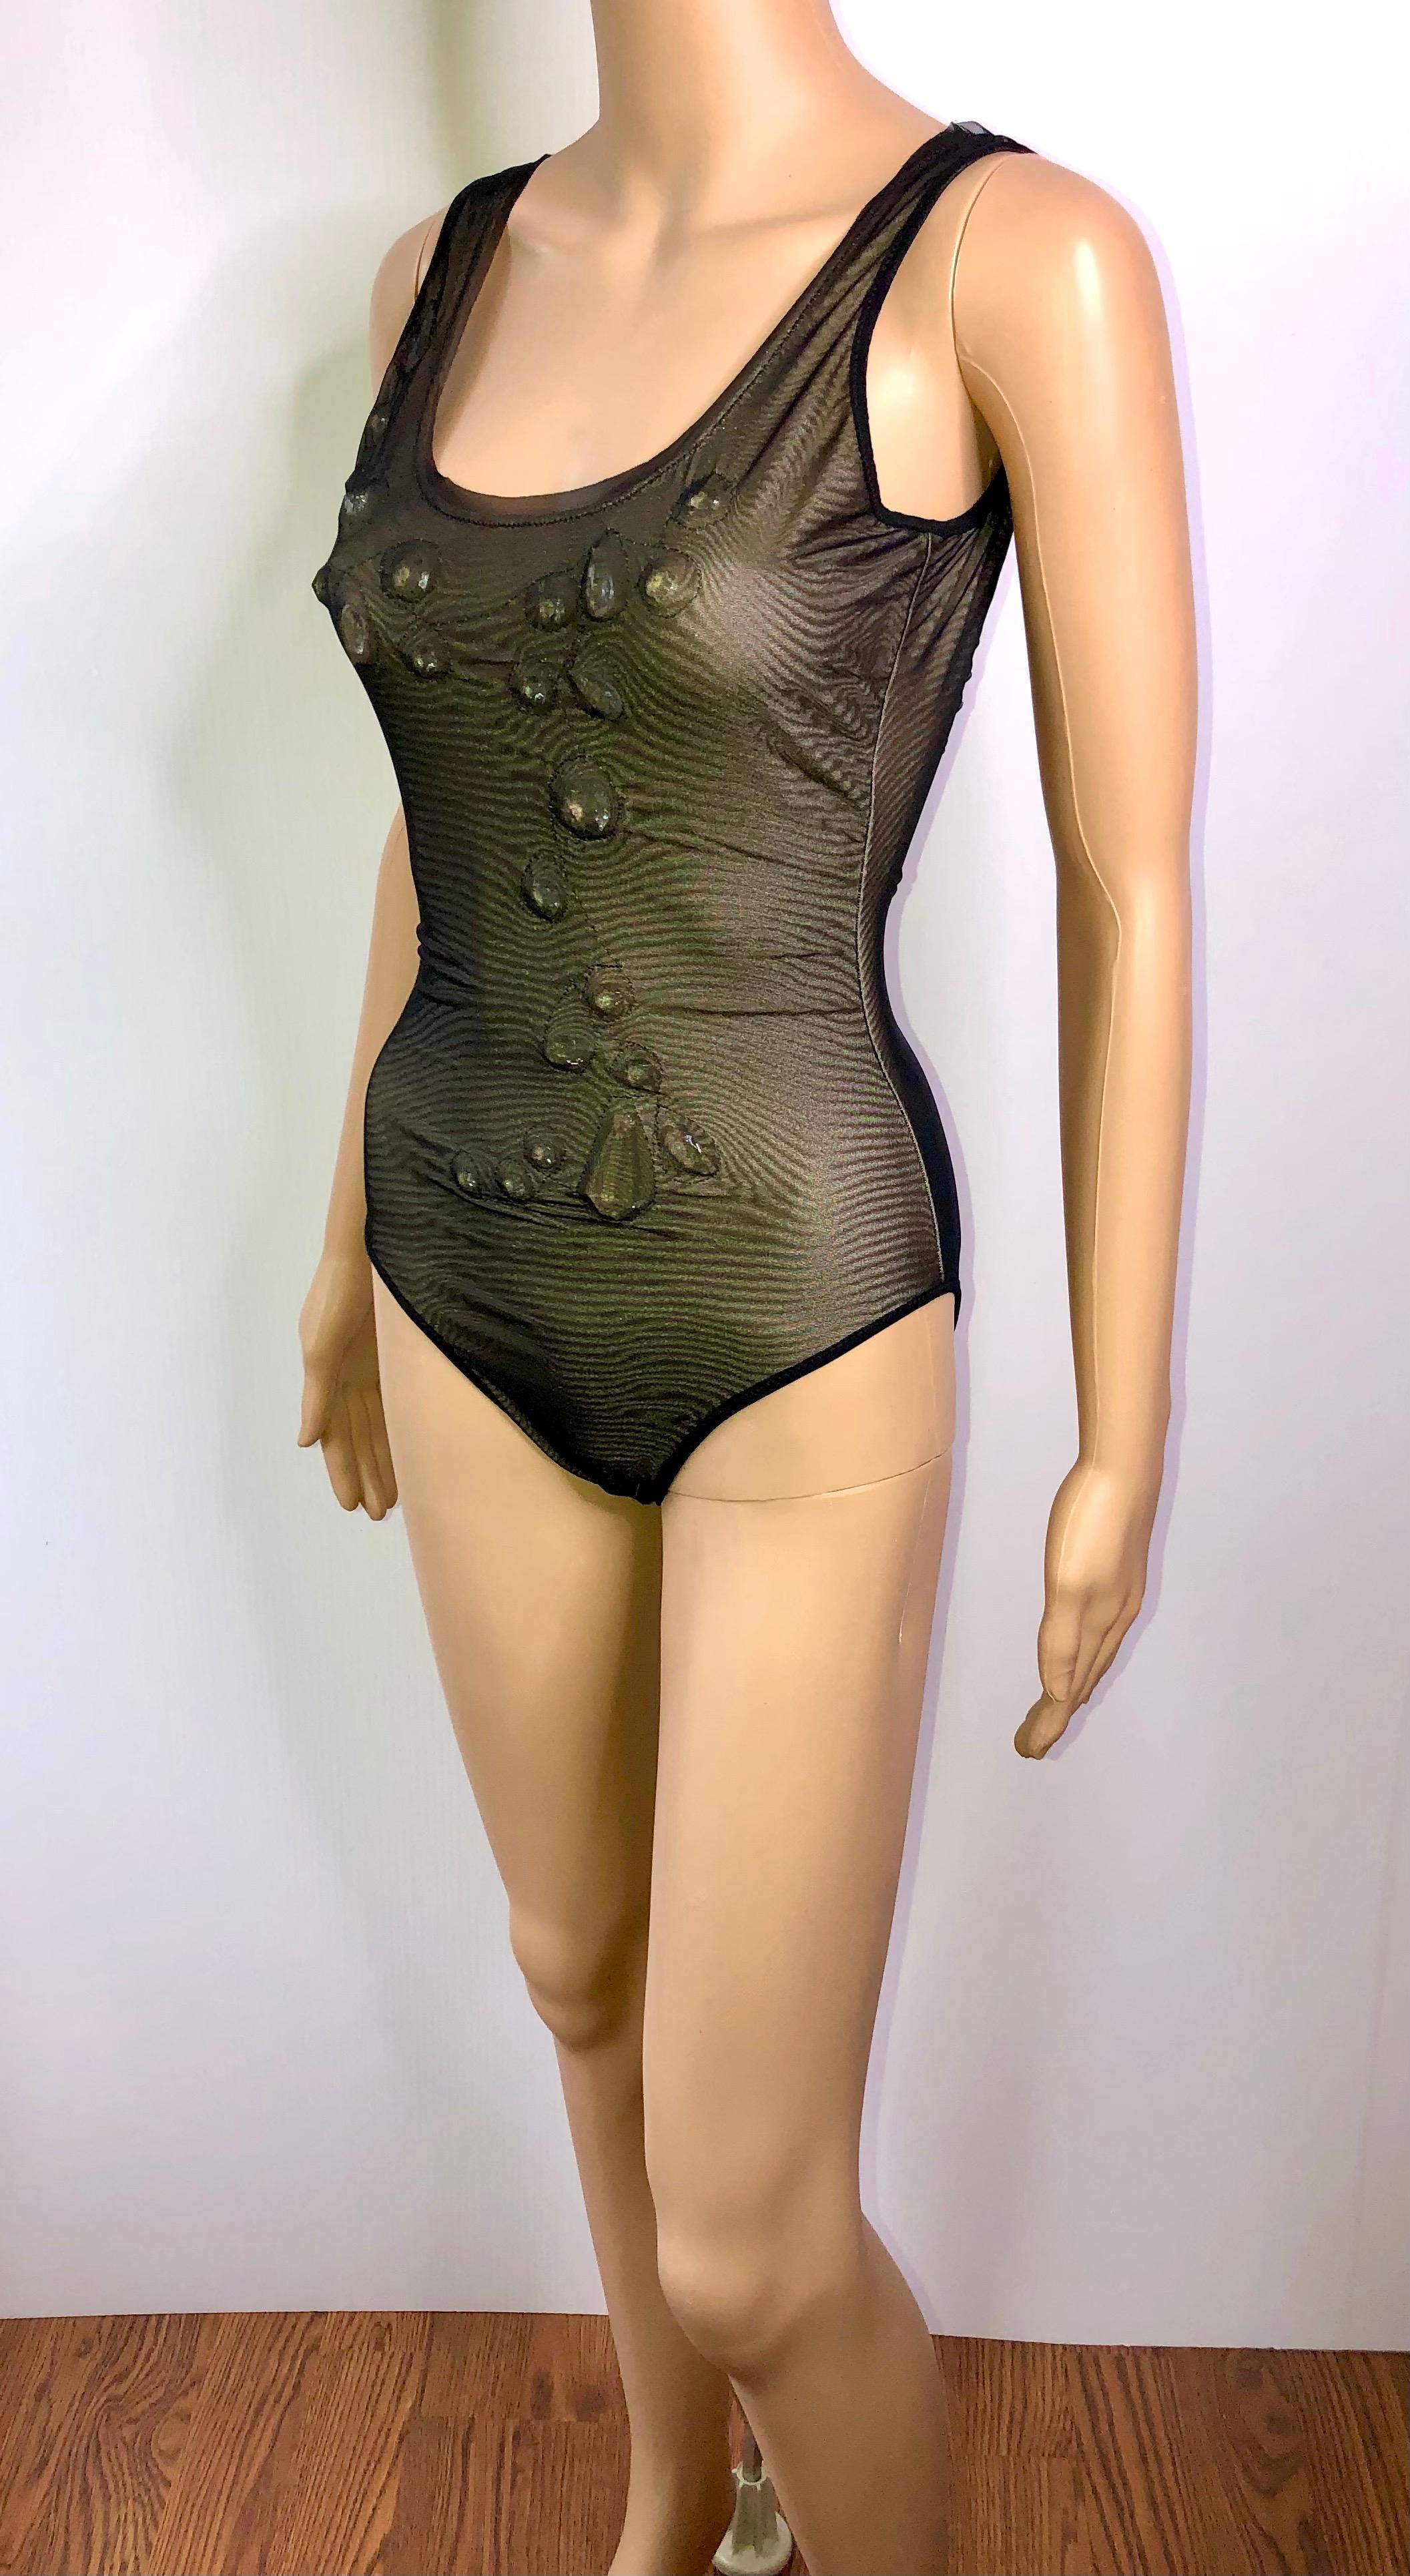 Jean Paul Gaultier Soleil F/W 2006 Crystal Embellished Bodysuit Swimwear Swimsuit

Please note this swimsuit is in excellent like new condition but the size tag is not included. 

